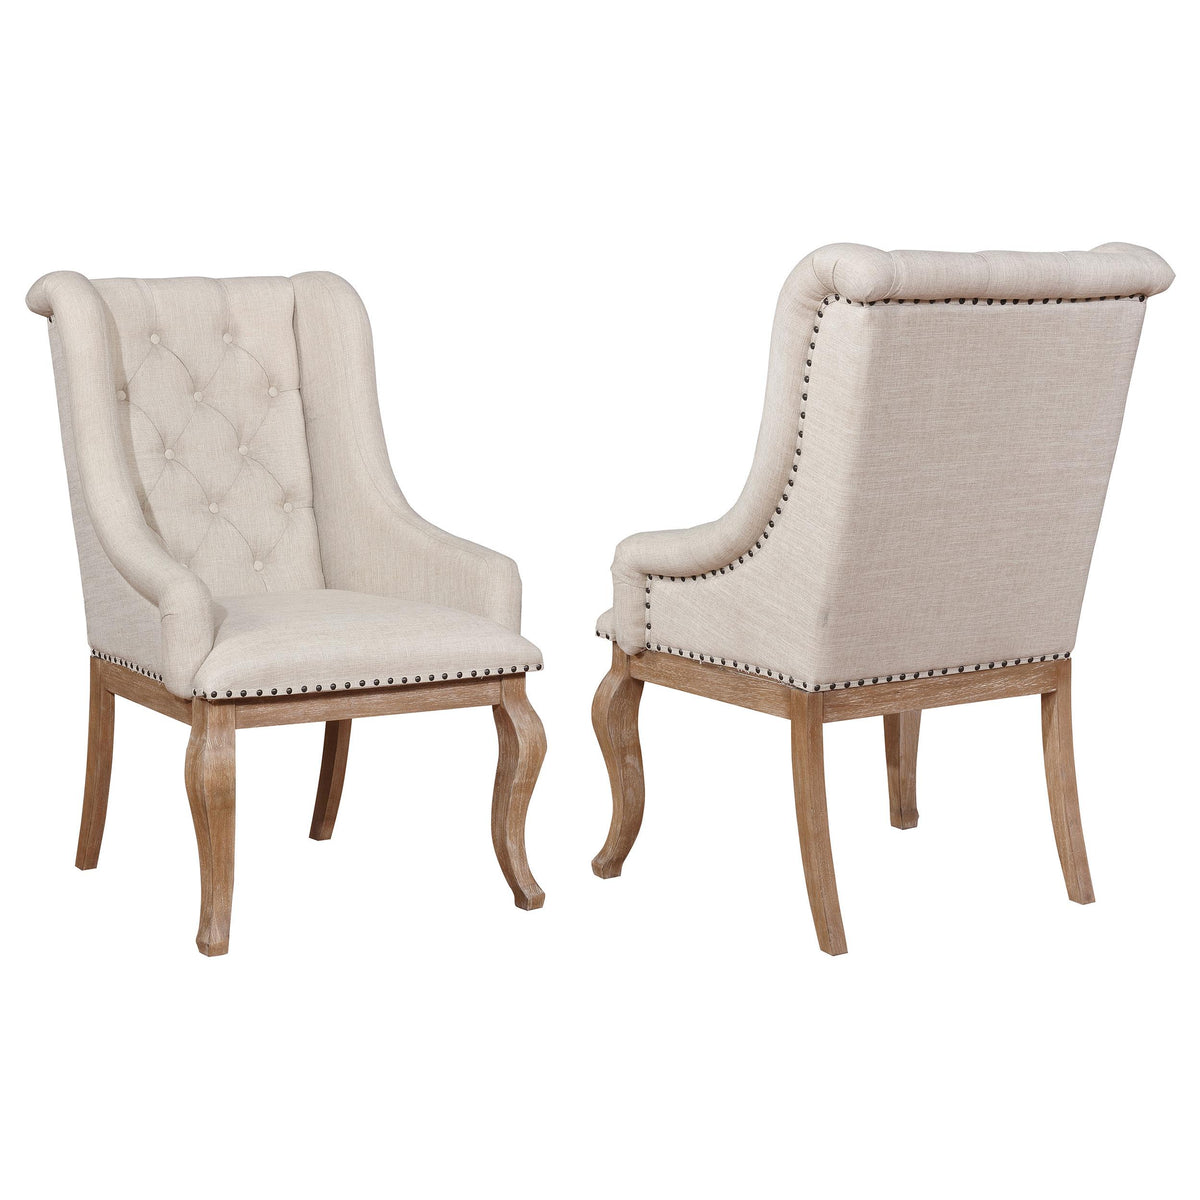 Brockway Tufted Arm Chairs Cream and Barley Brown (Set of 2)  Half Price Furniture